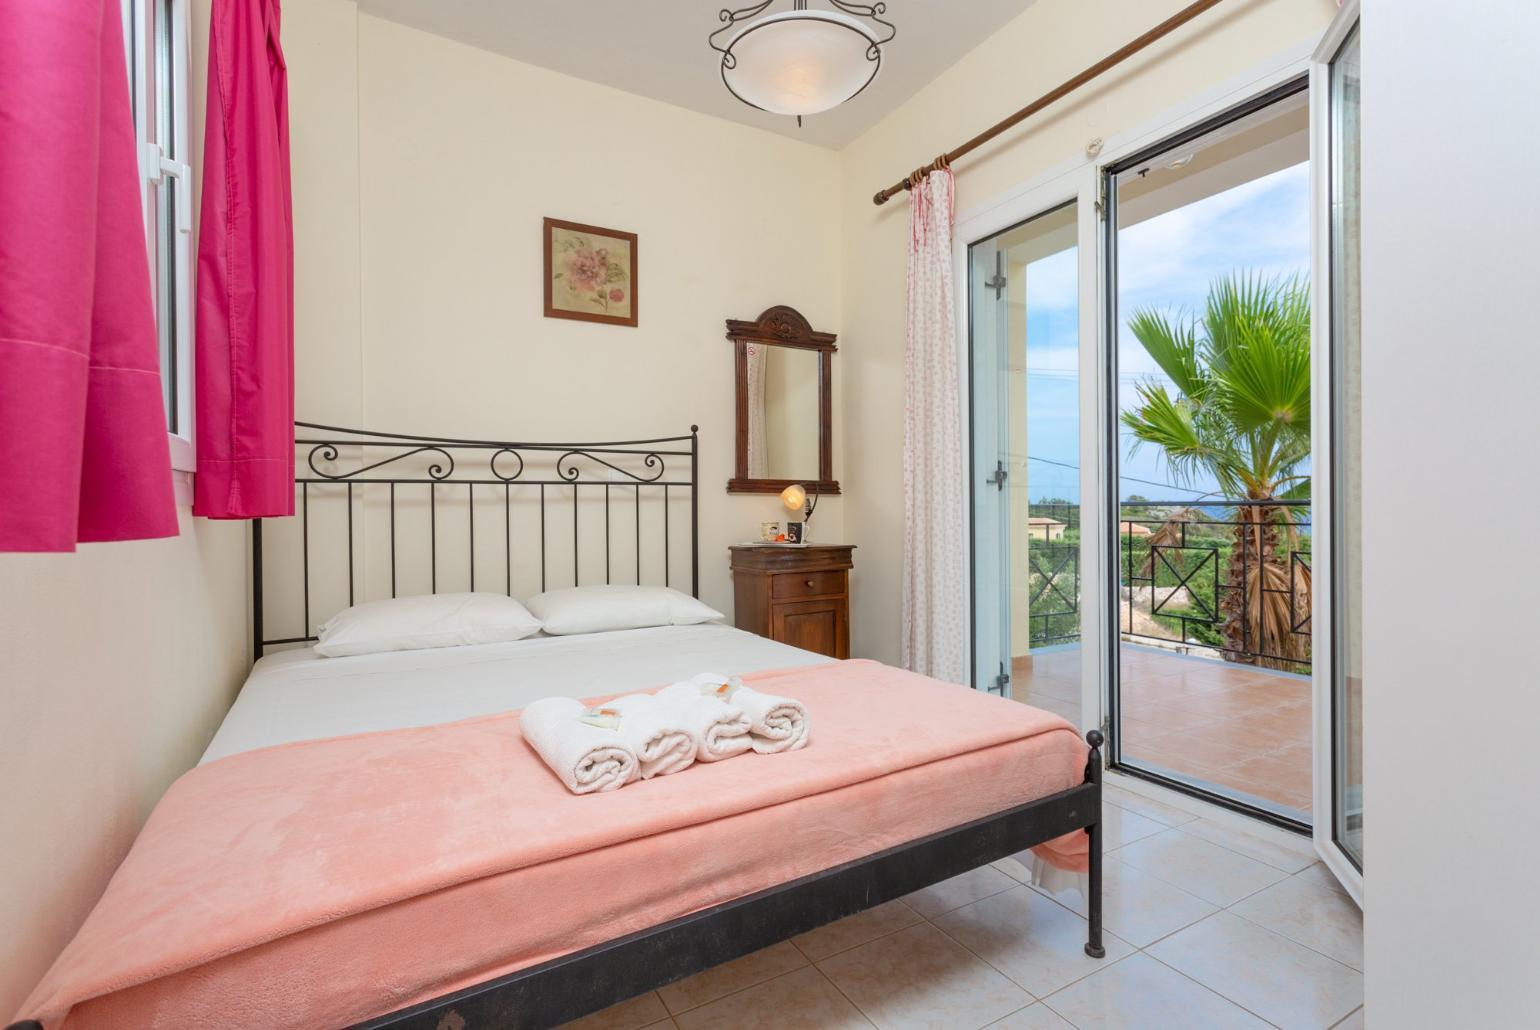 Double bedroom on first floor with en suite bathroom, A/C, and balcony access with sea views